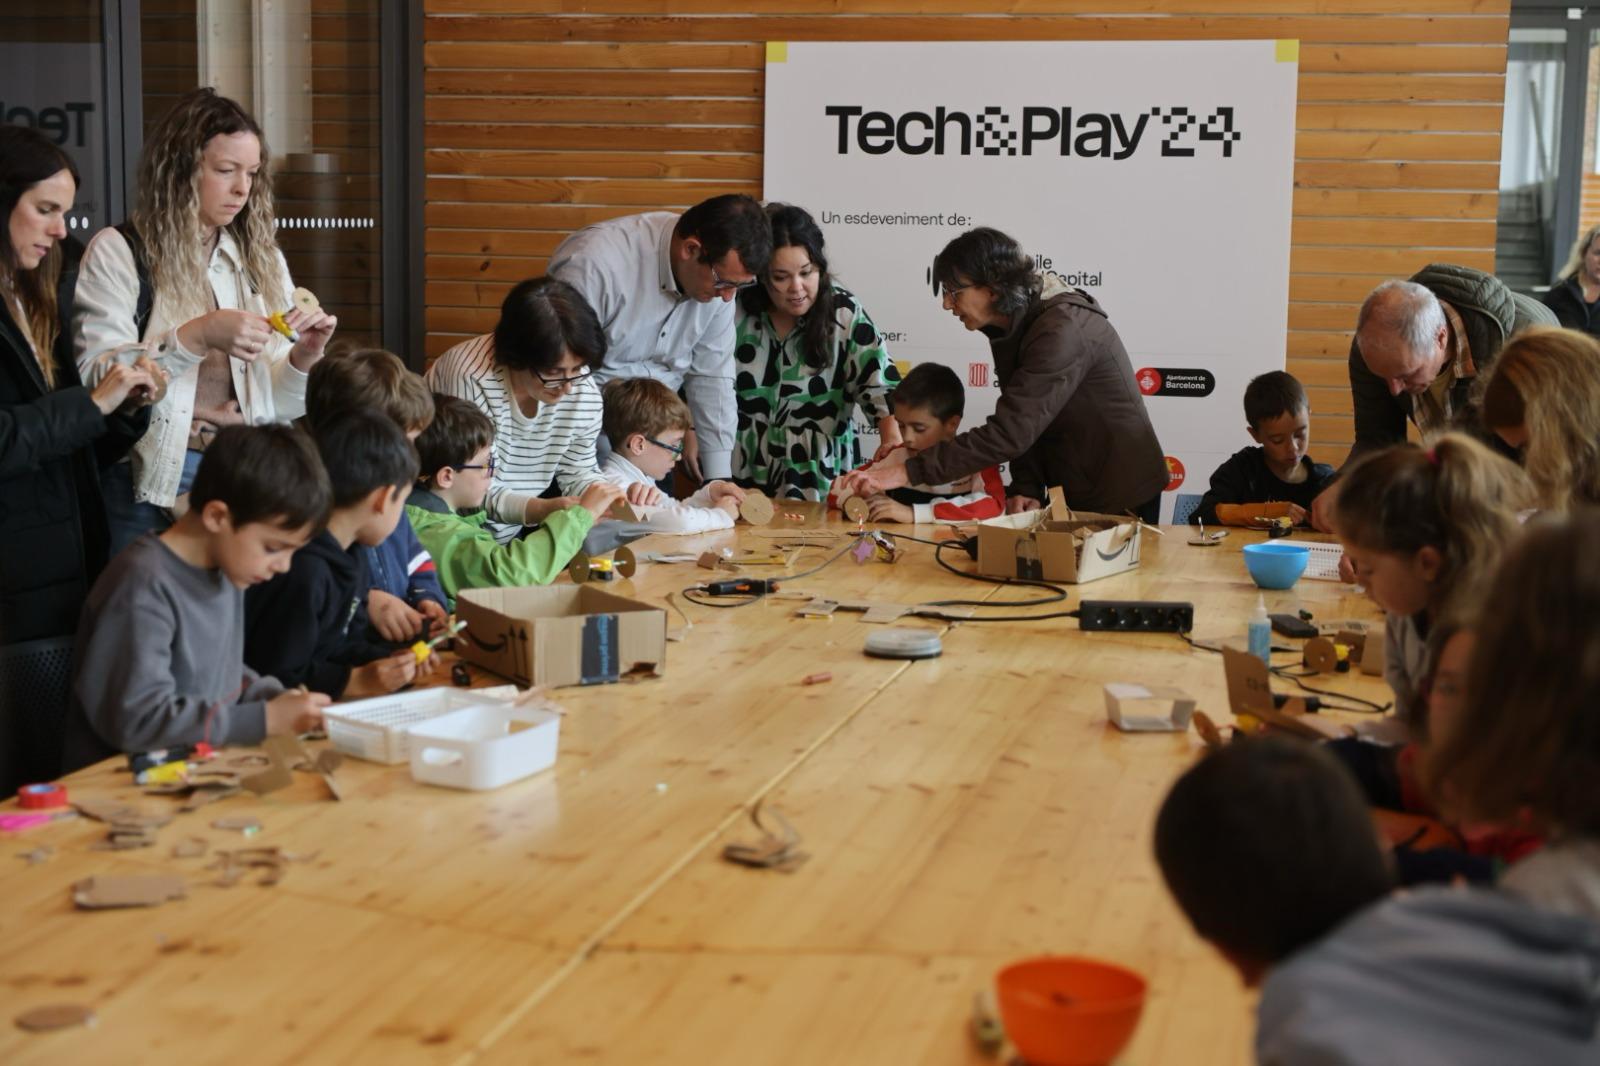 The Tech&Play festival culminates four days of activities with a special day to bring technology closer to children